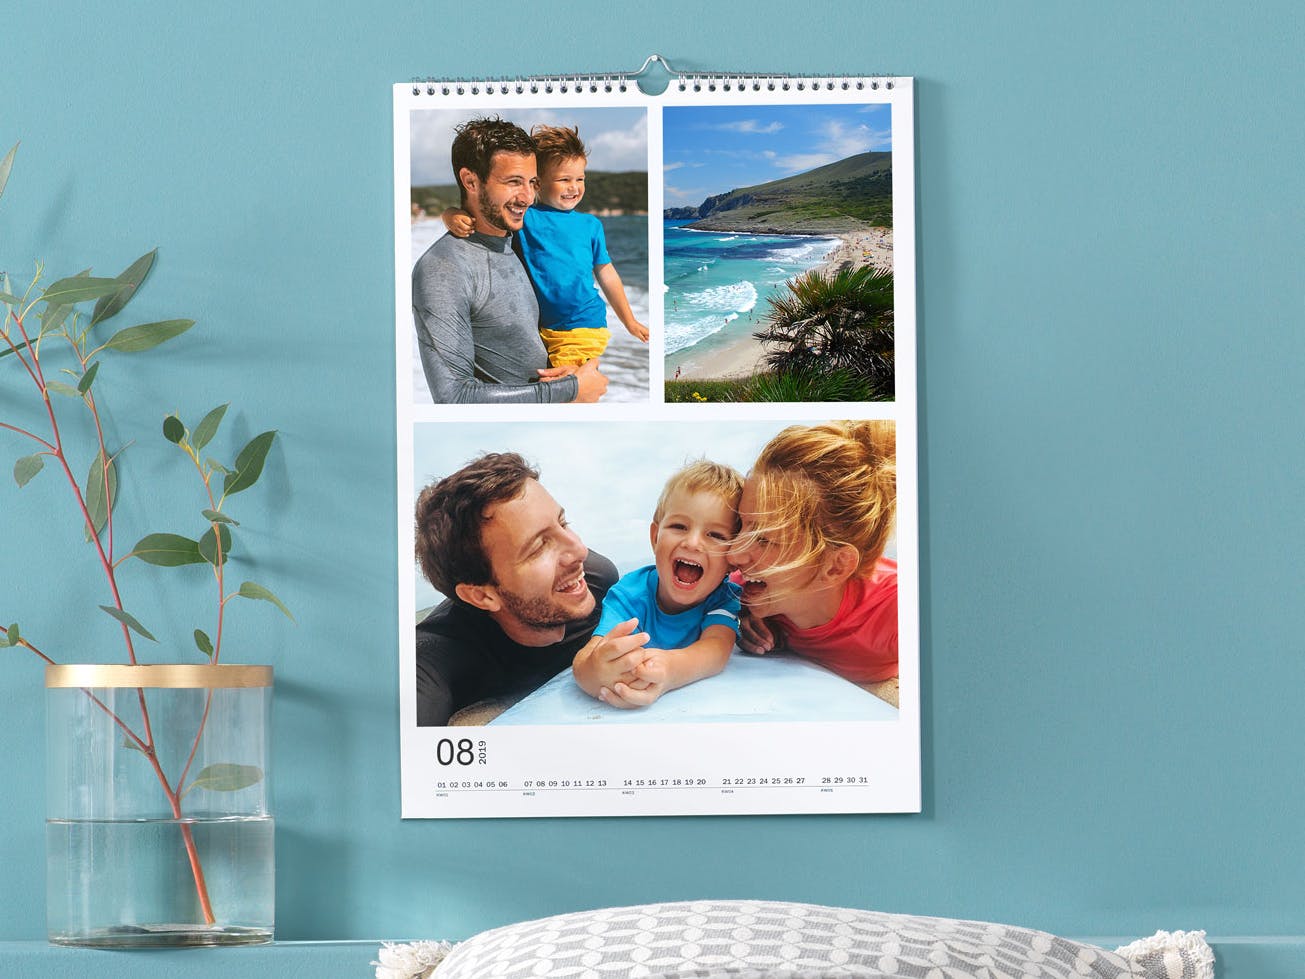 Photo calendar as a collage with an image of a family at the beach